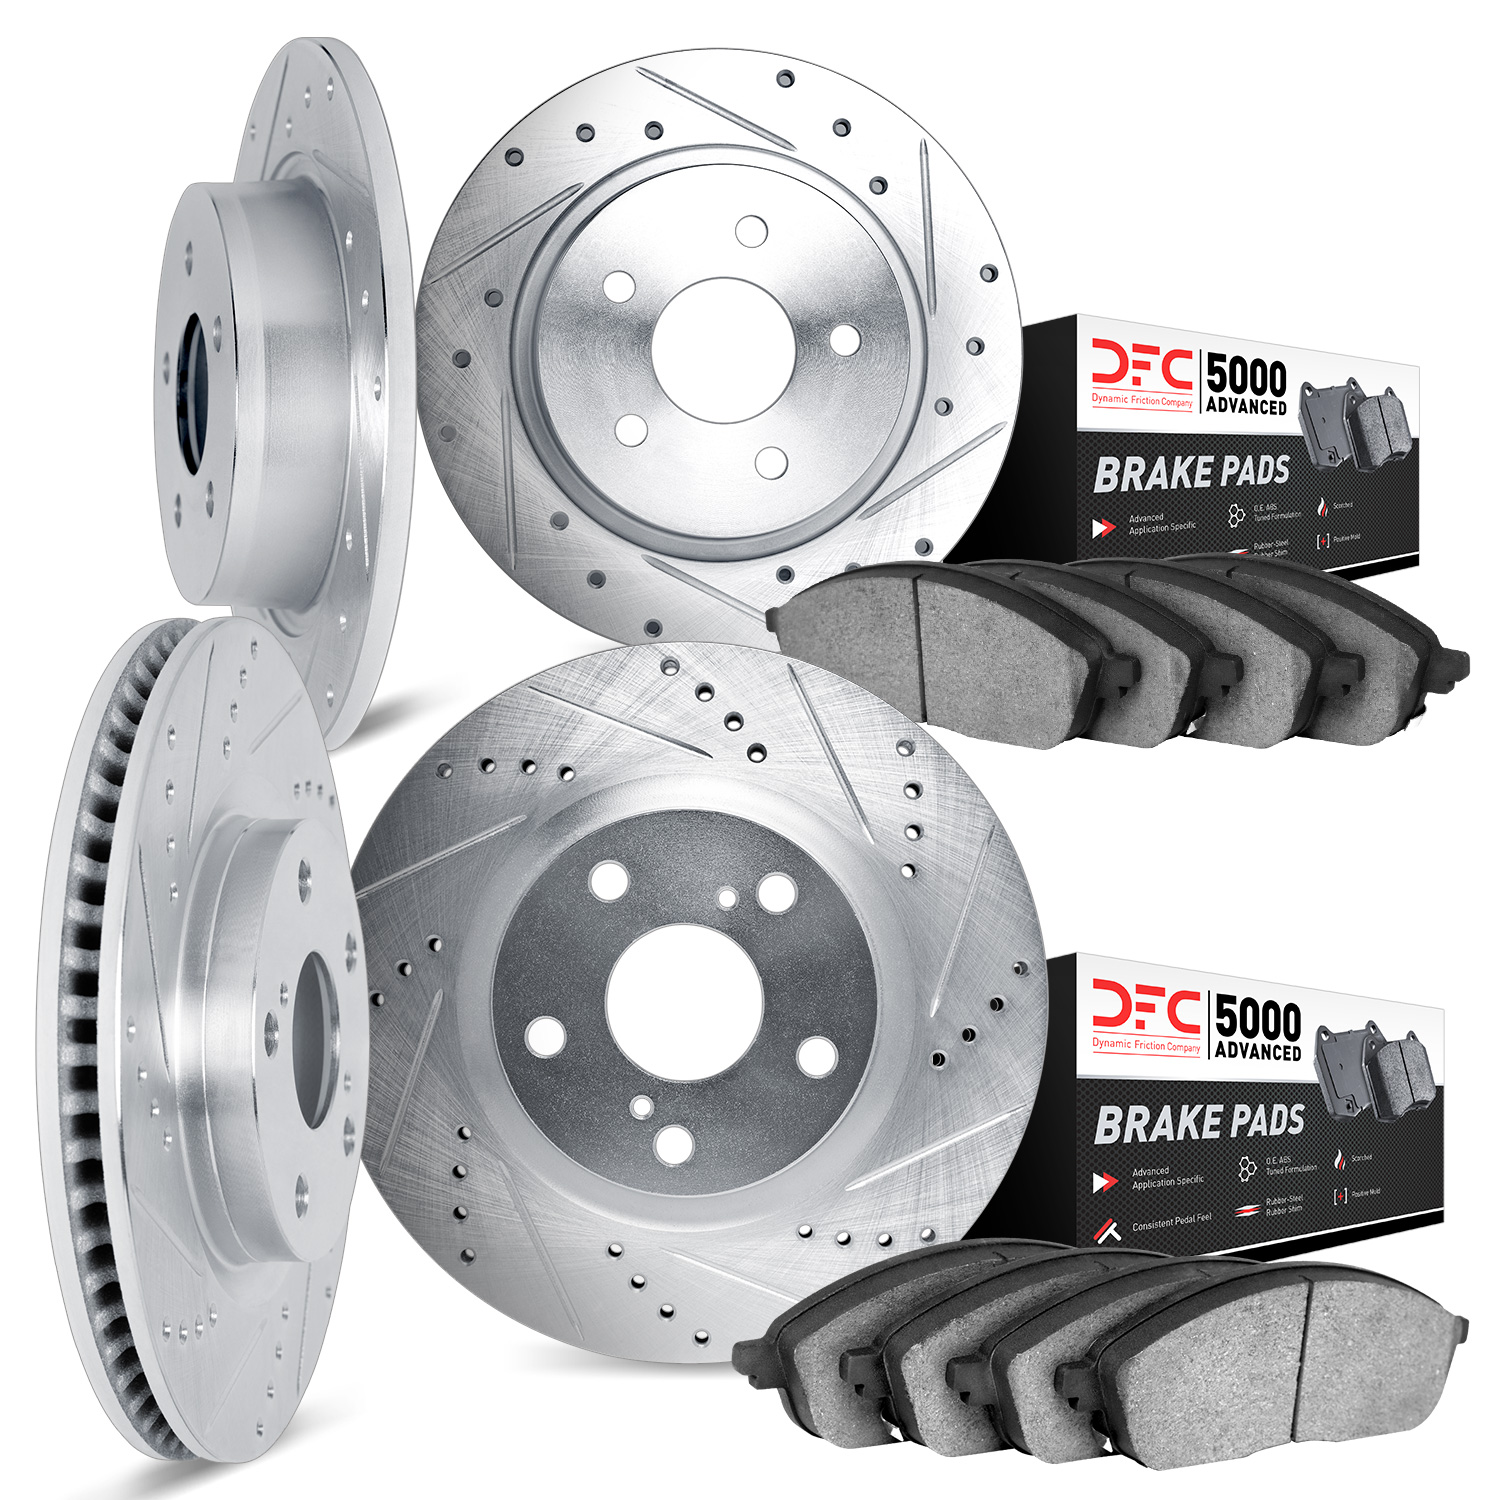 7504-63024 Drilled/Slotted Brake Rotors w/5000 Advanced Brake Pads Kit [Silver], 1998-2005 Mercedes-Benz, Position: Front and Re